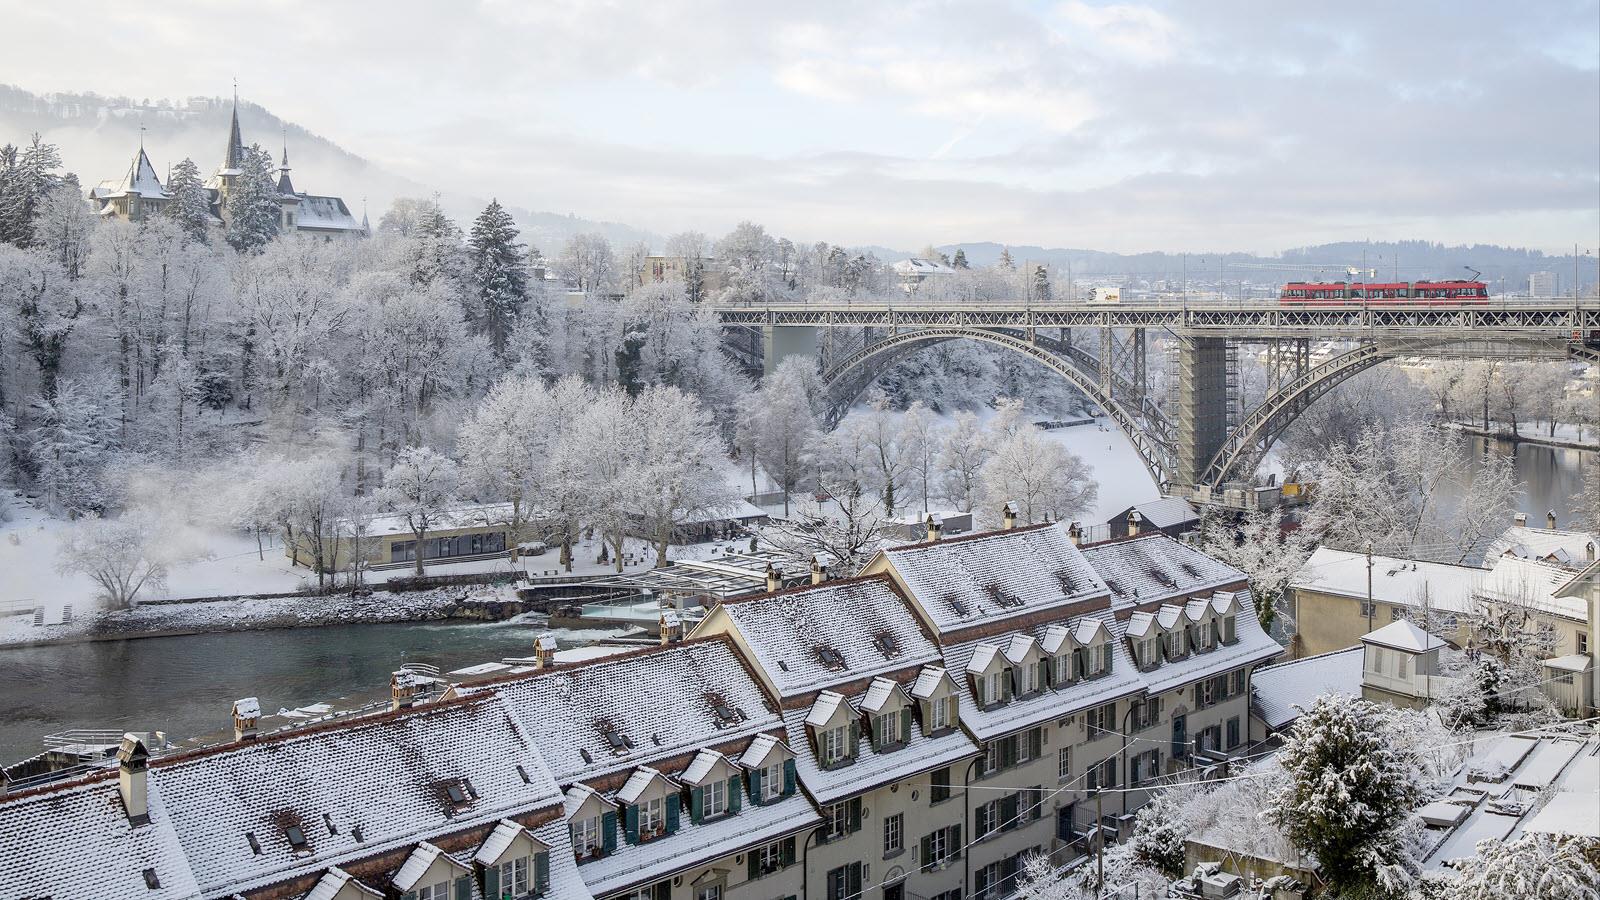 Red train crosses the elevated tracks above the Aare River in Bern, Switzerland.